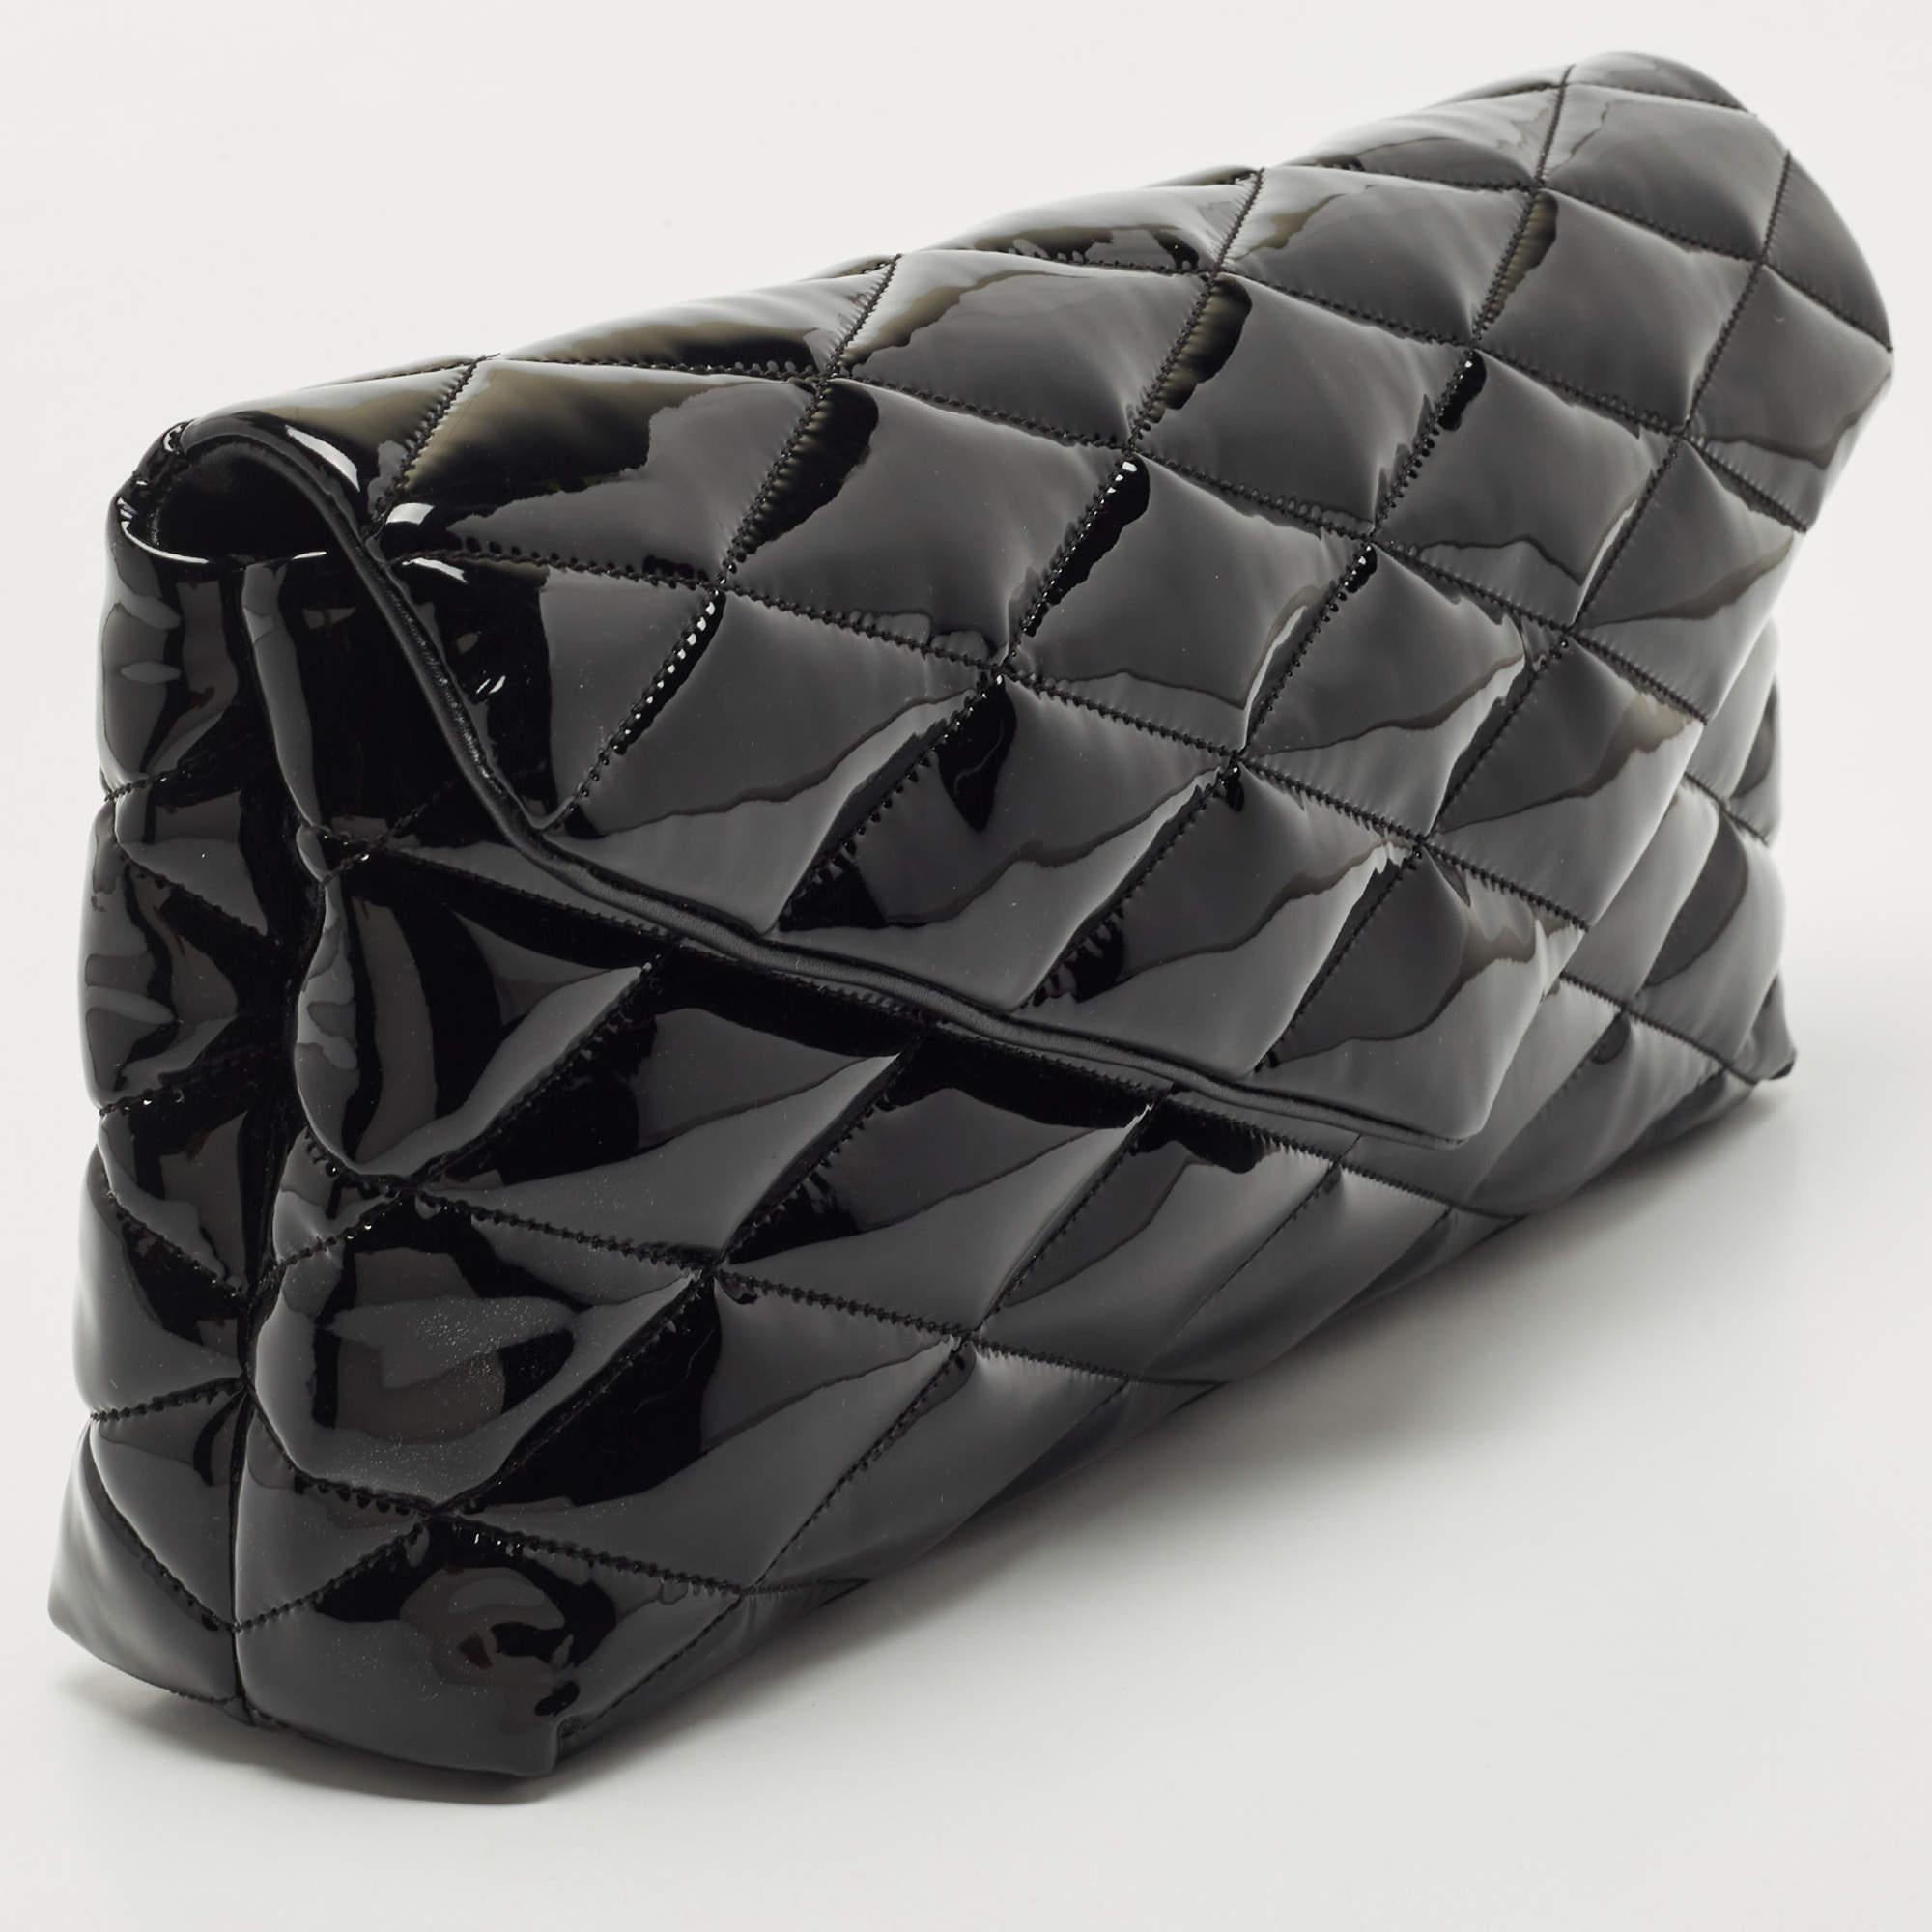 Women's Saint Laurent Black Quilted Patent Leather Sade Puffer Envelope Clutch